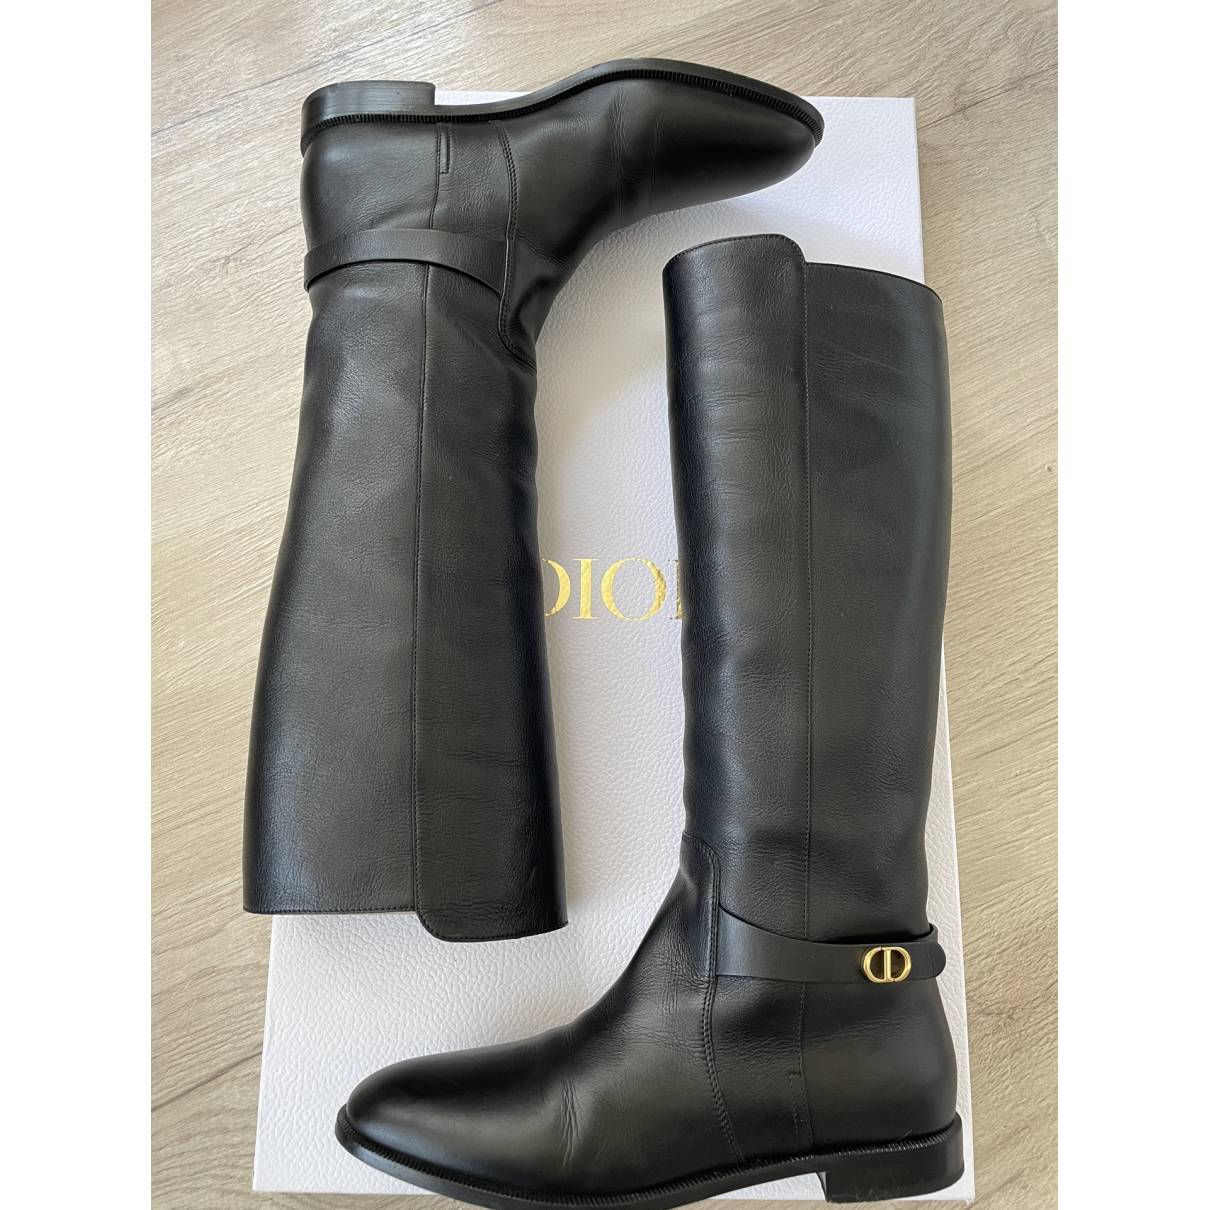 Dior - Authenticated Dior Empreinte Boots - Leather Black Plain for Women, Good Condition